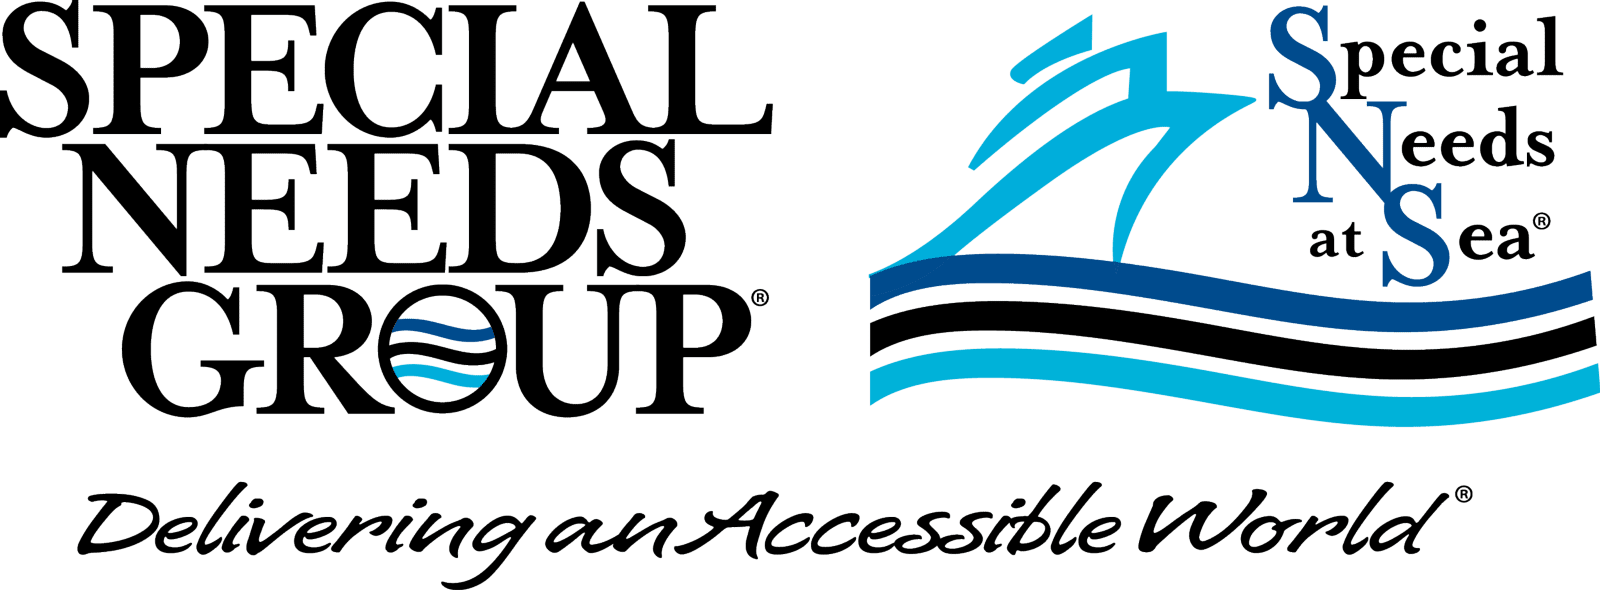 special-needs-at-sea